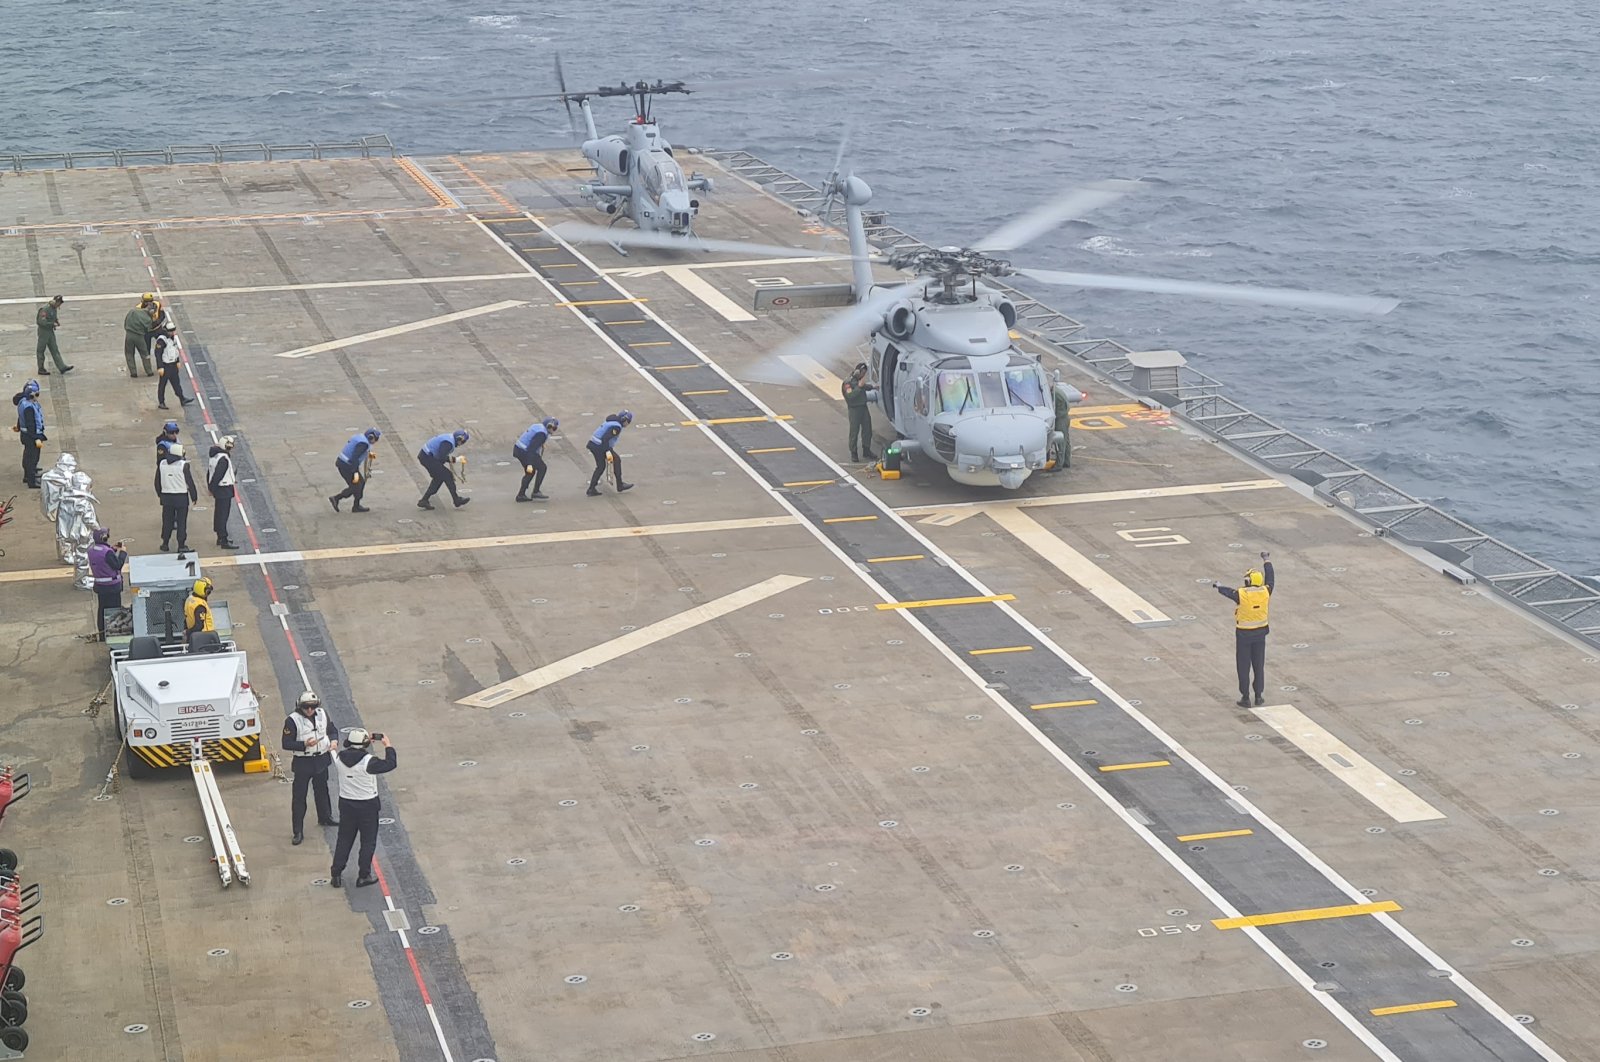 Two helicopters are seen during the deployment on Anadolu LHD, Istanbul, Türkiye, Nov. 18, 2022. (Photo: @tcsavunma)